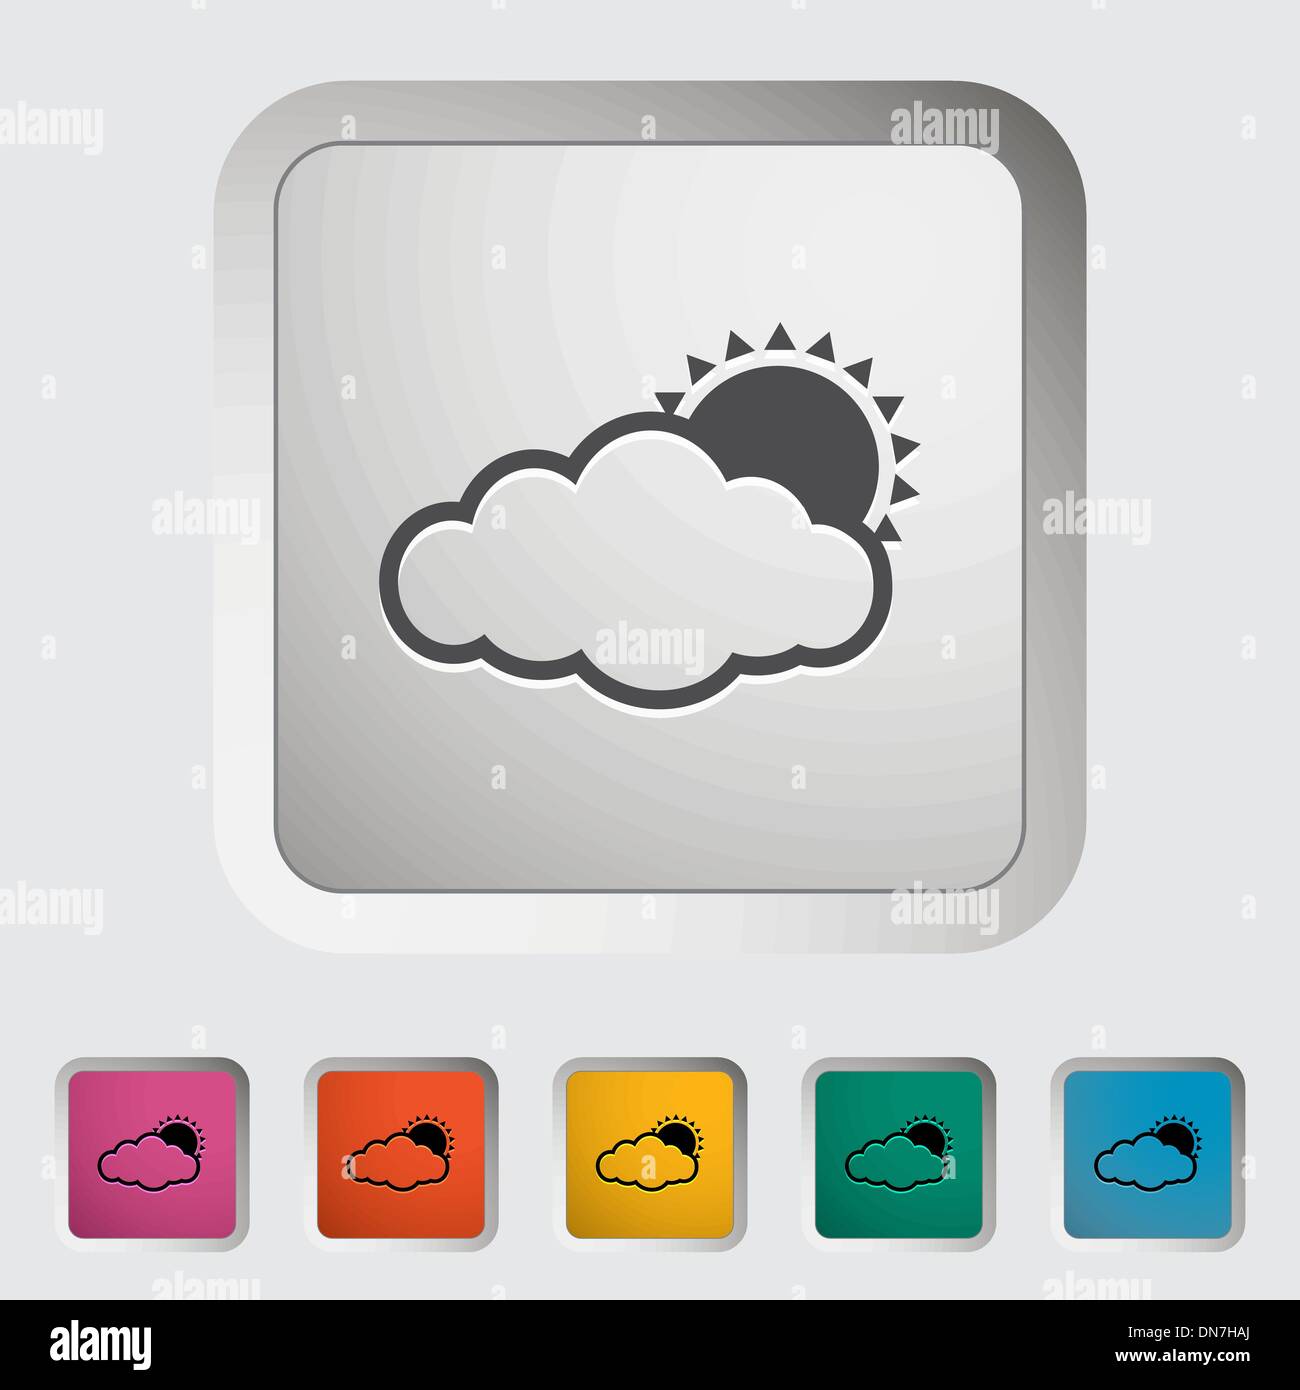 Cloudiness single icon. Stock Vector